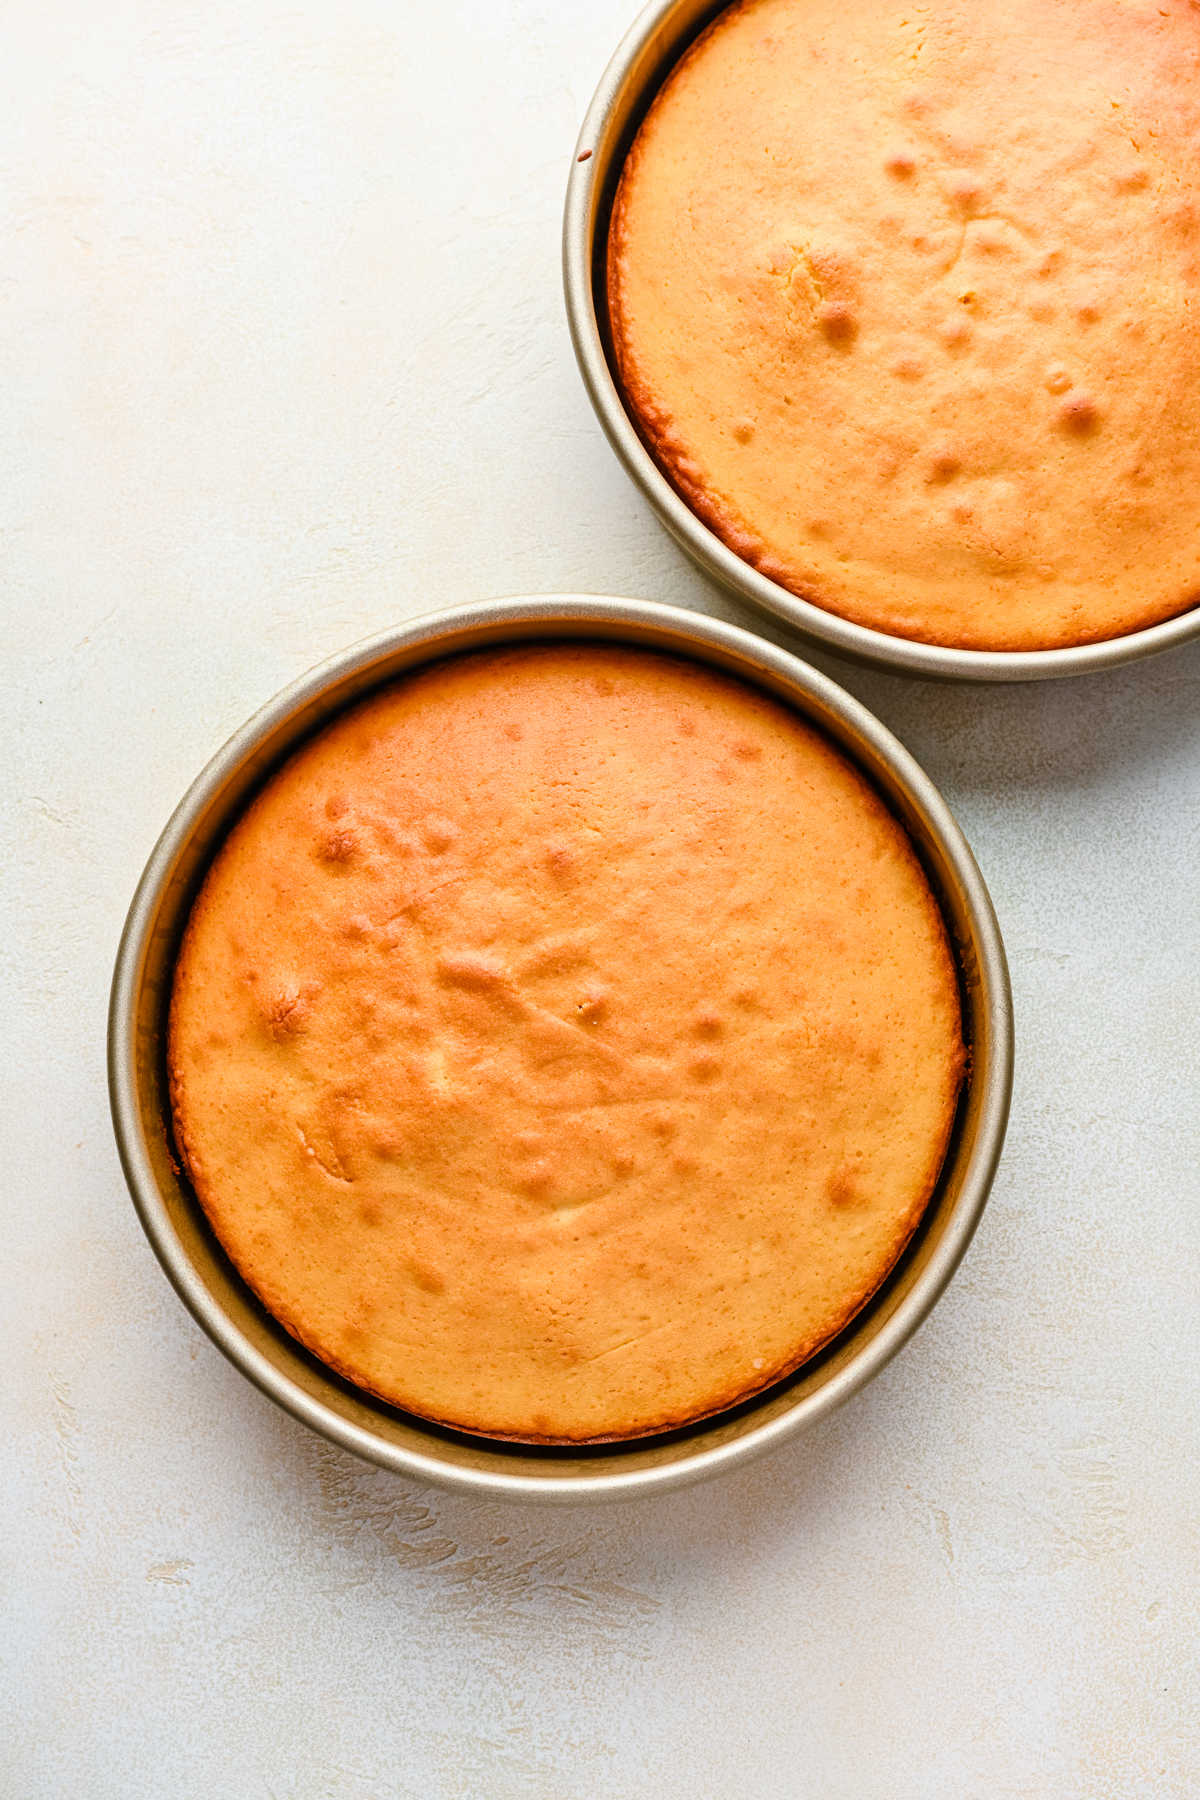 Two baked yellow cakes in round cake pans.